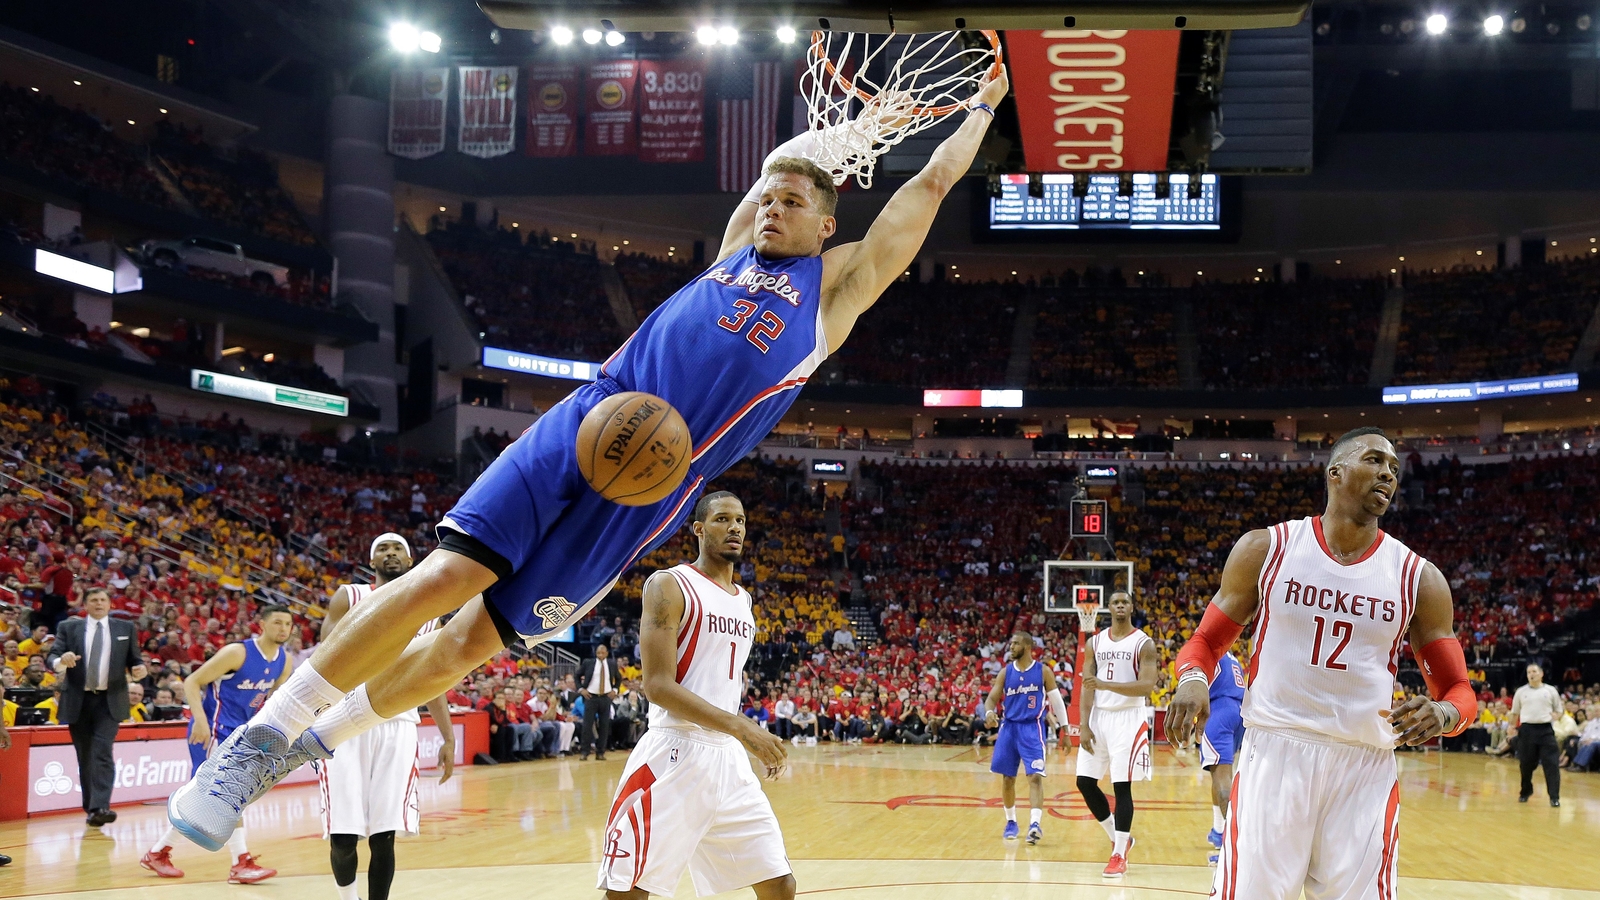 blake-griffin-retires-after-14-year-nba-career-that-included-rookie-of-the-year,-all-star-honors